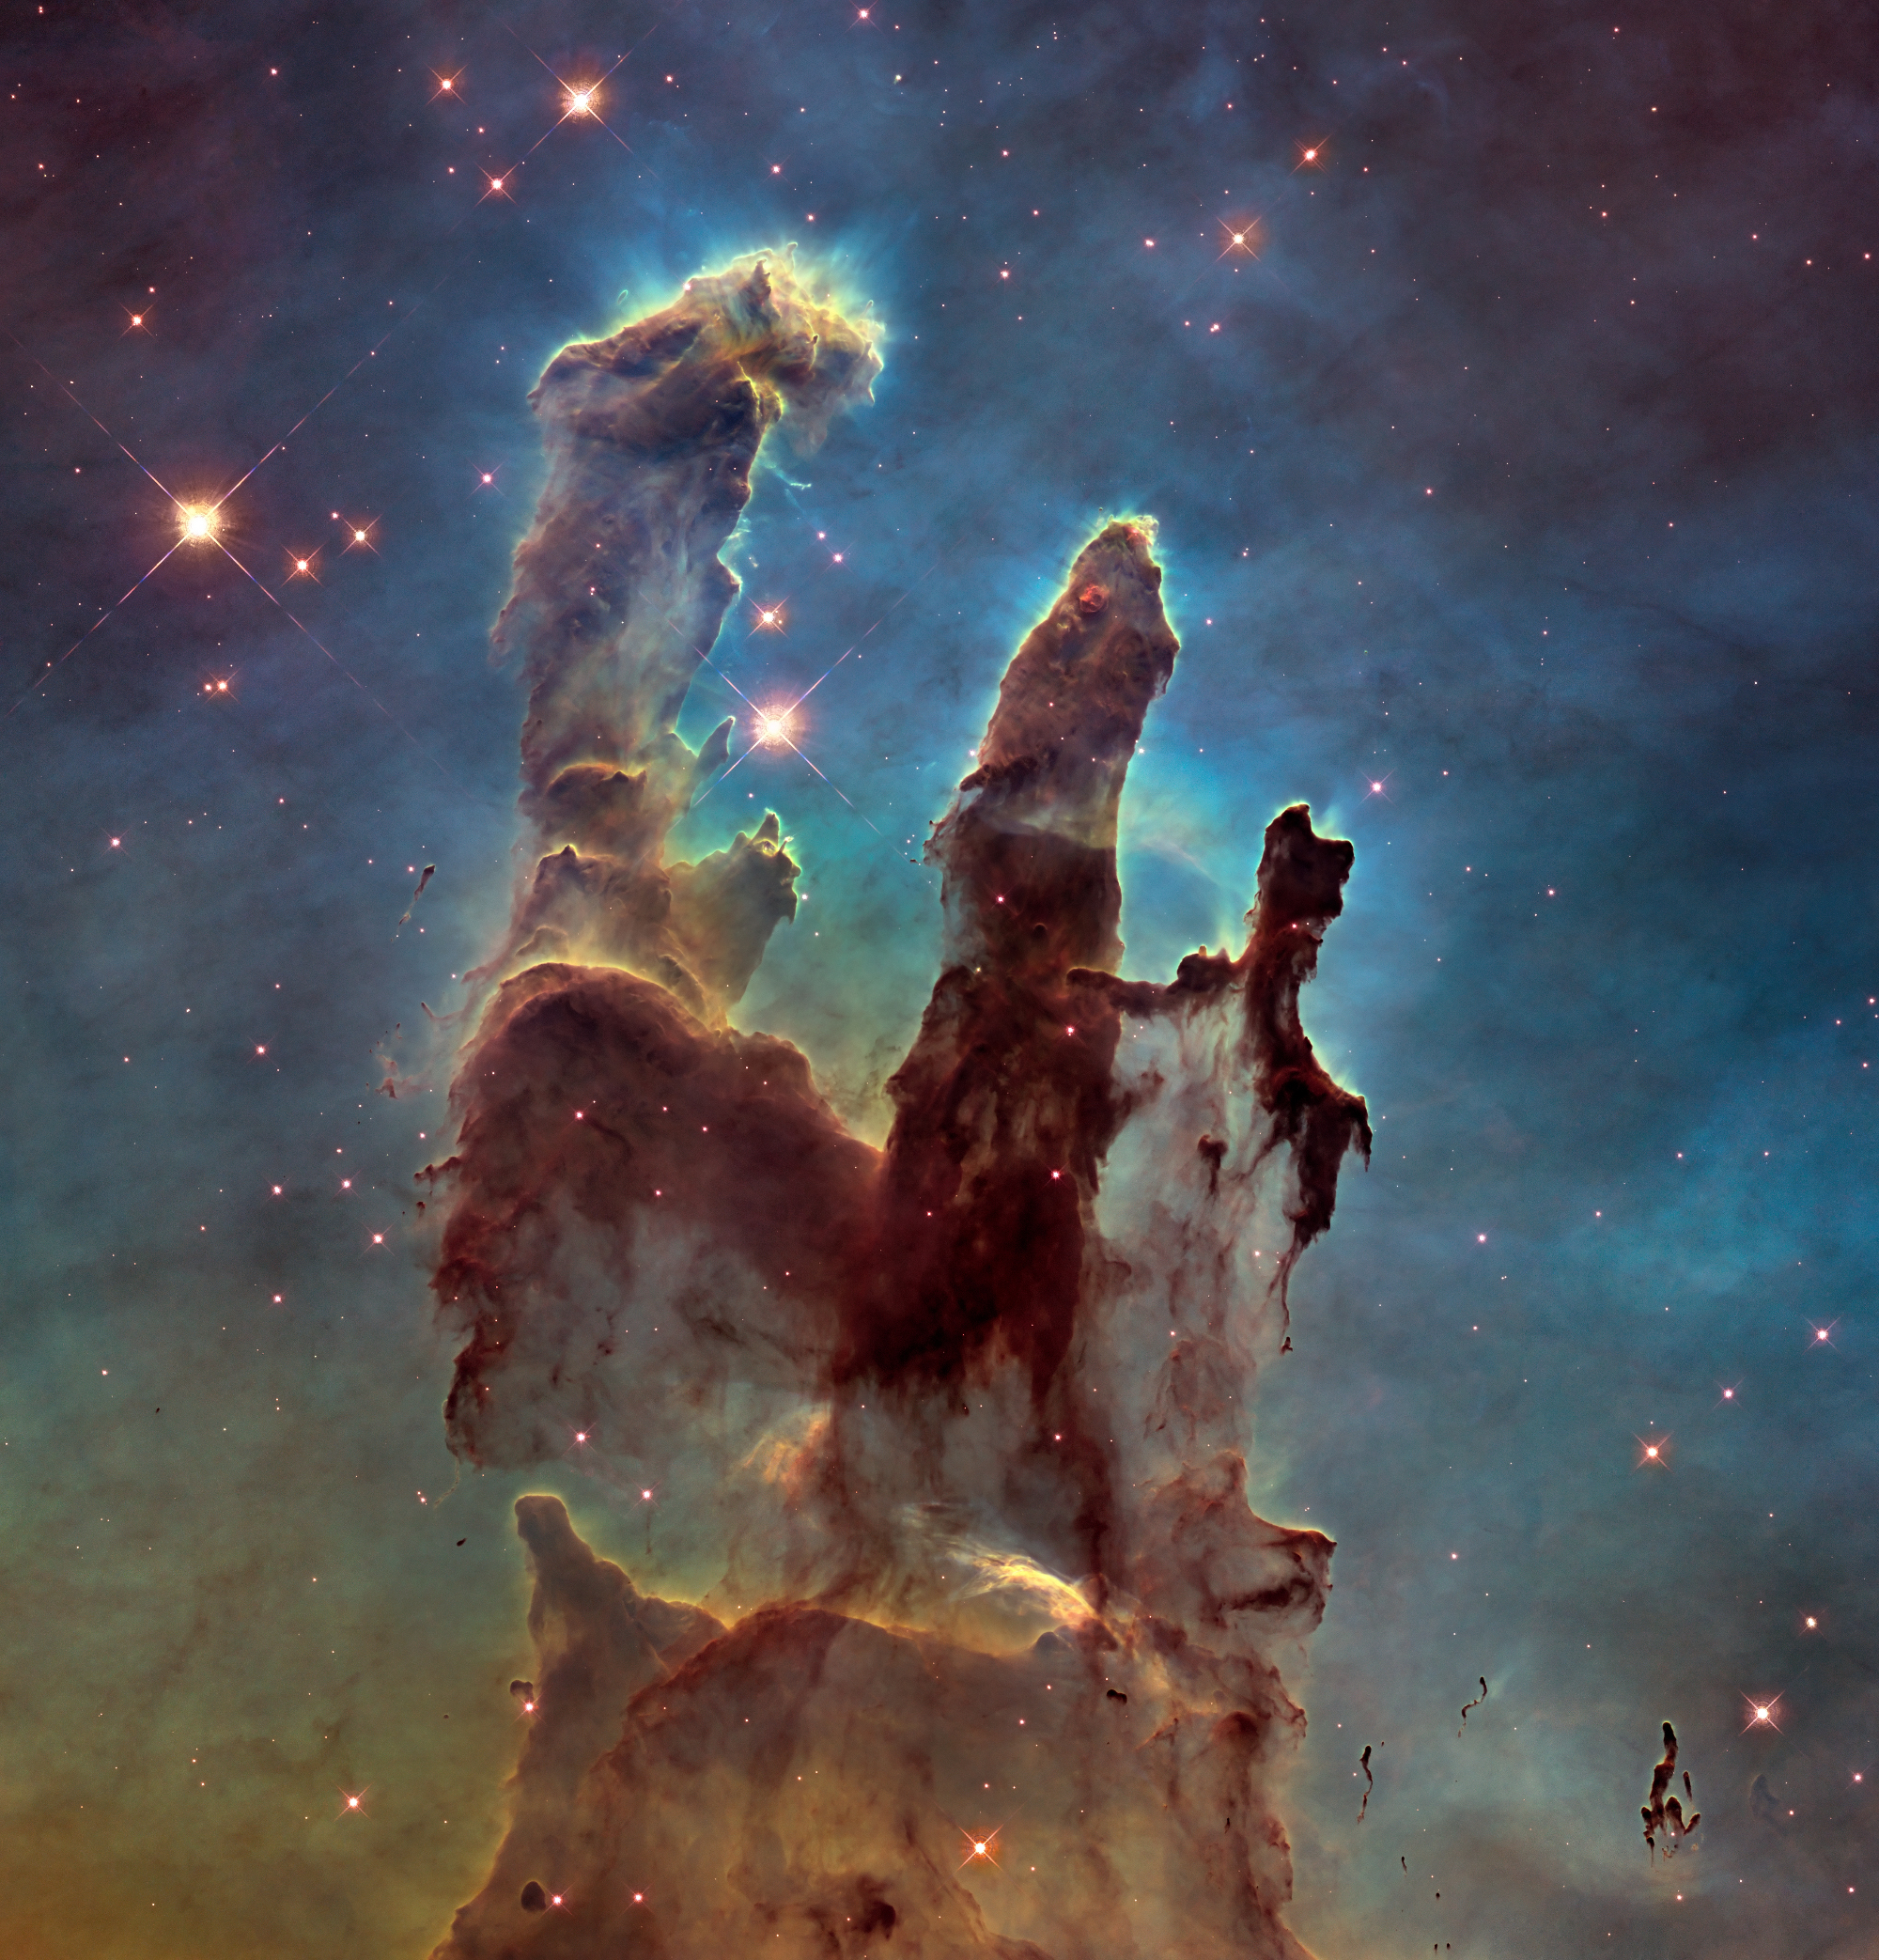 Hubble Space Telescope image of the Pillars of Creation taken in 2014.